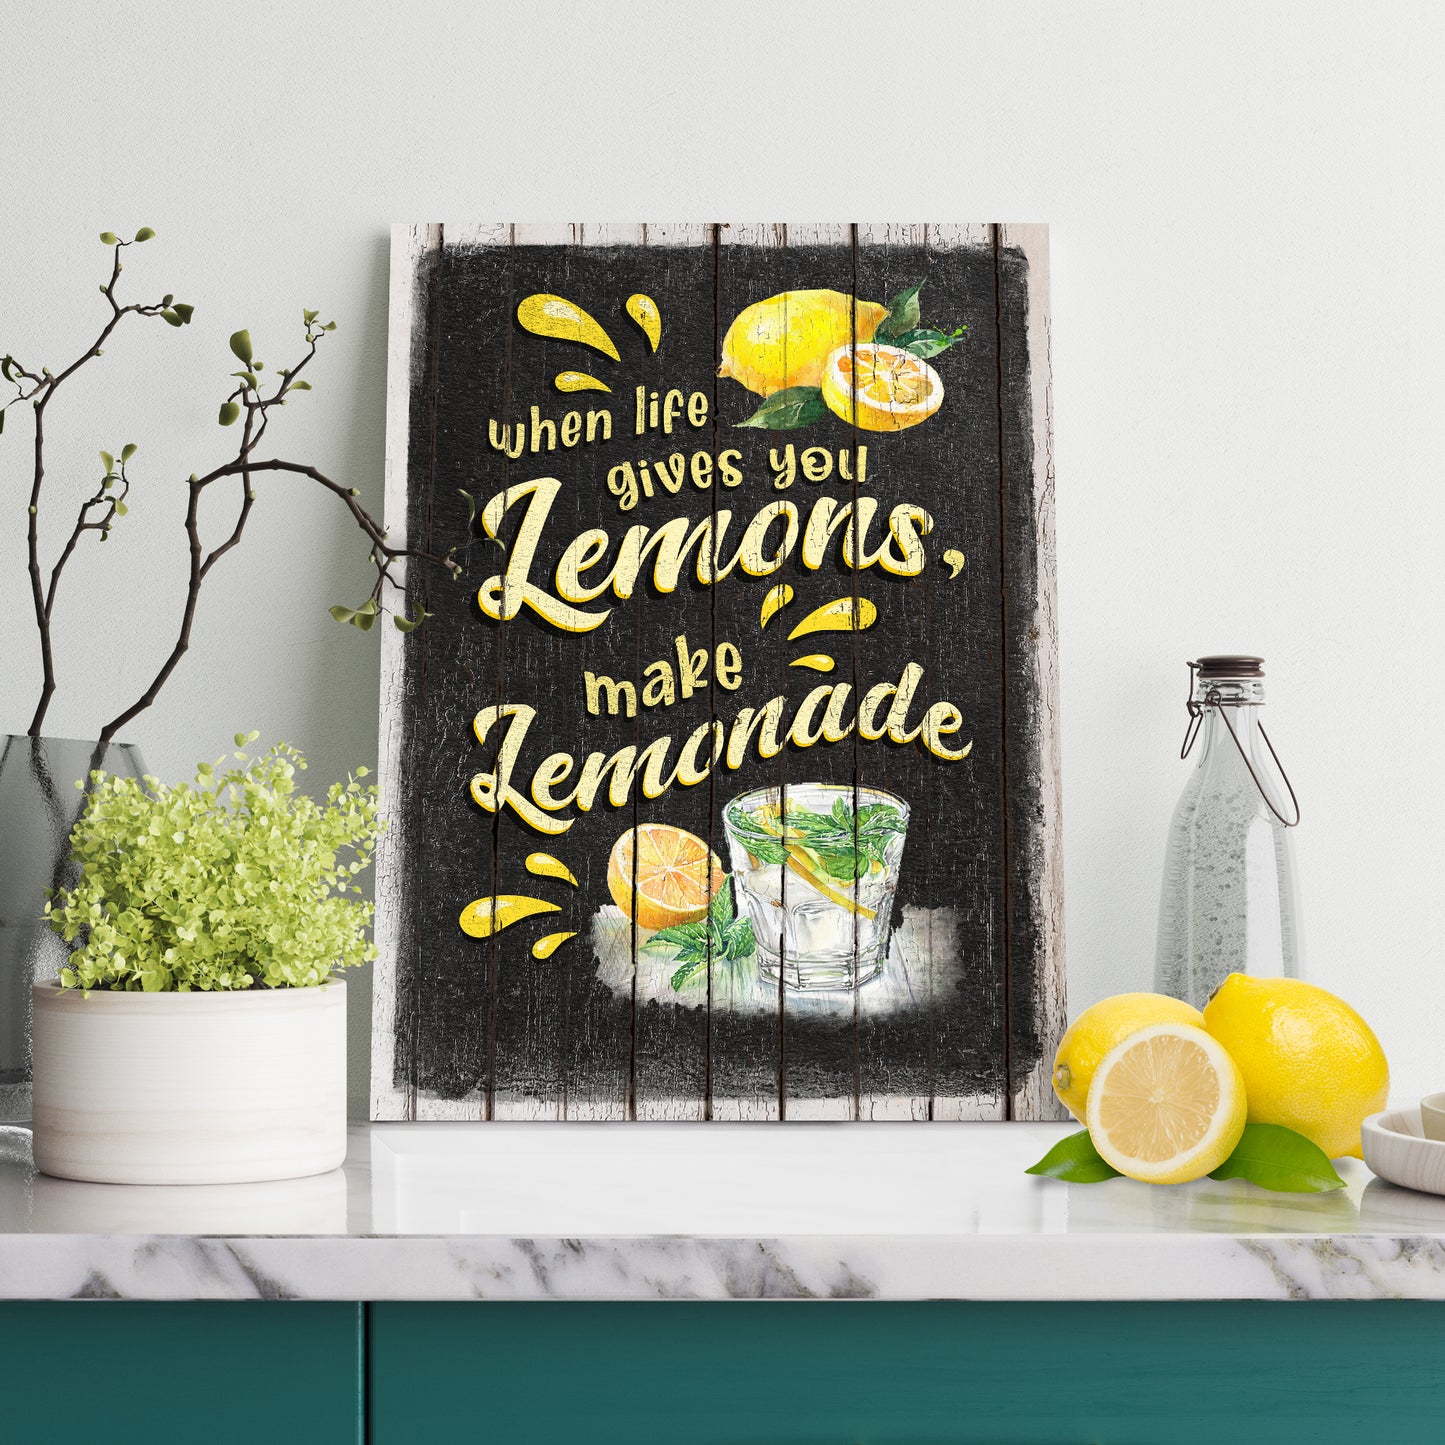 When Life Gives You Lemons, Make Lemonade Sign - Image by Tailored Canvases